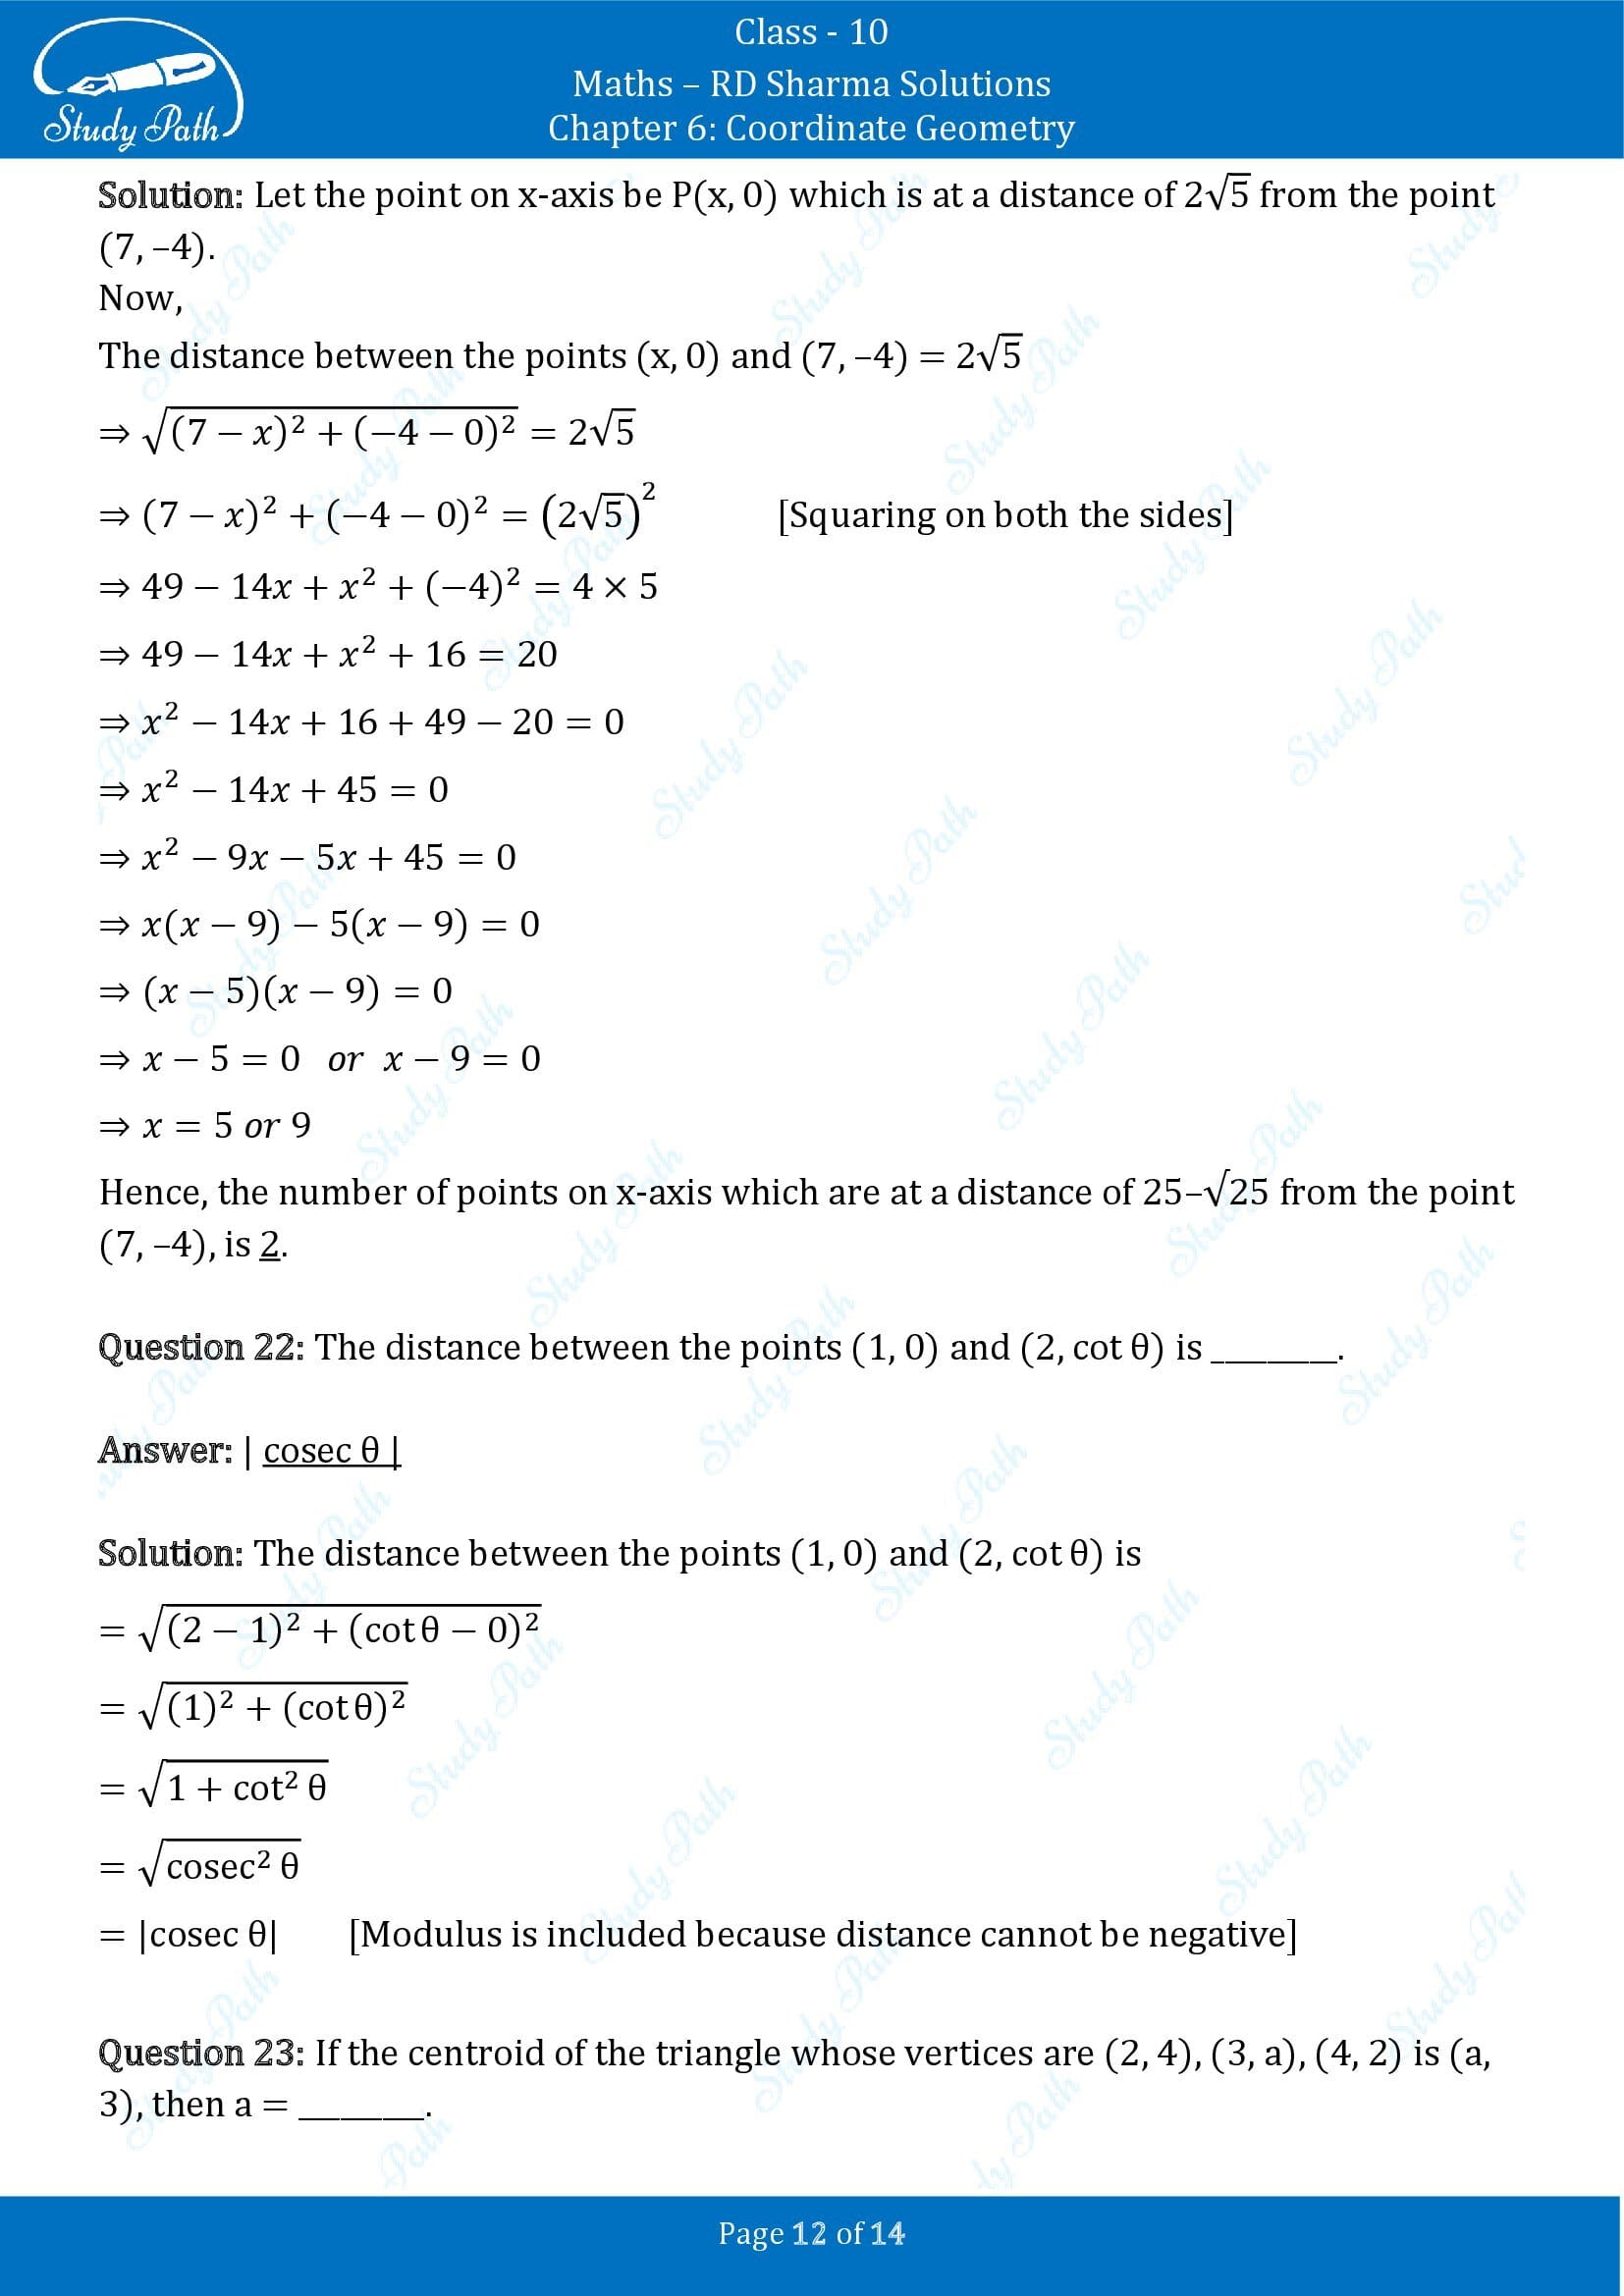 RD Sharma Solutions Class 10 Chapter 6 Coordinate Geometry Fill in the Blank Type Questions FBQs 00012